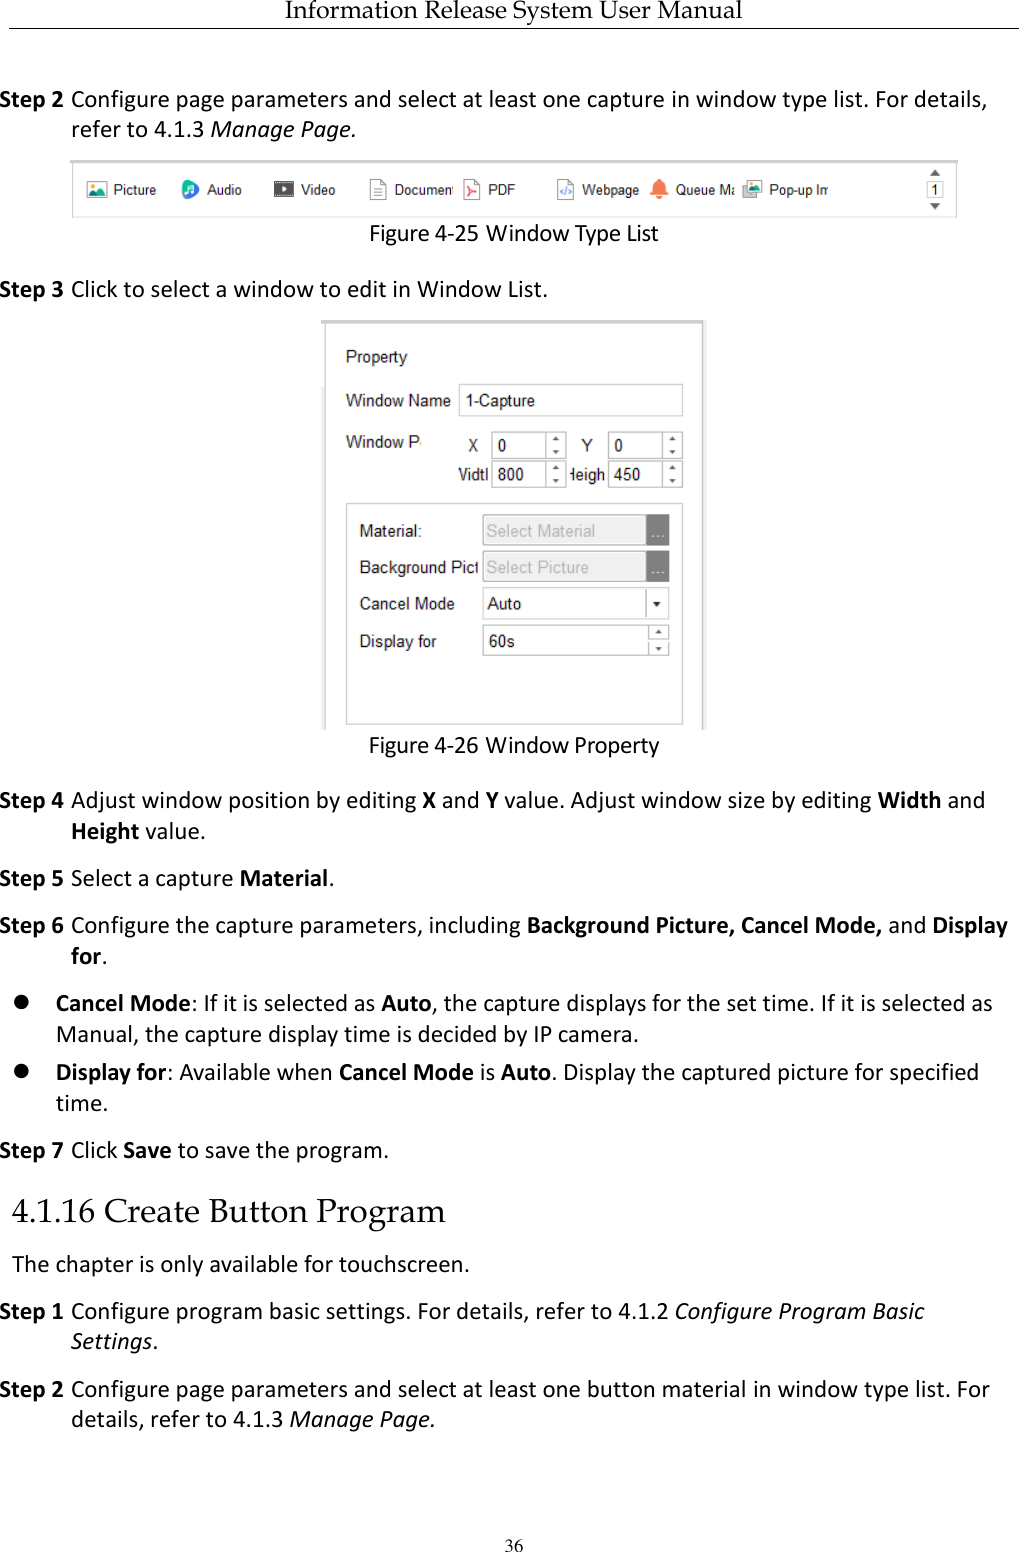 Information Release System User Manual 36 Step 2 Configure page parameters and select at least one capture in window type list. For details, refer to 4.1.3 Manage Page.  Figure 4-25 Window Type List Step 3 Click to select a window to edit in Window List.  Figure 4-26 Window Property Step 4 Adjust window position by editing X and Y value. Adjust window size by editing Width and Height value. Step 5 Select a capture Material. Step 6 Configure the capture parameters, including Background Picture, Cancel Mode, and Display for.  Cancel Mode: If it is selected as Auto, the capture displays for the set time. If it is selected as Manual, the capture display time is decided by IP camera.  Display for: Available when Cancel Mode is Auto. Display the captured picture for specified time. Step 7 Click Save to save the program. 4.1.16 Create Button Program The chapter is only available for touchscreen. Step 1 Configure program basic settings. For details, refer to 4.1.2 Configure Program Basic Settings. Step 2 Configure page parameters and select at least one button material in window type list. For details, refer to 4.1.3 Manage Page.   